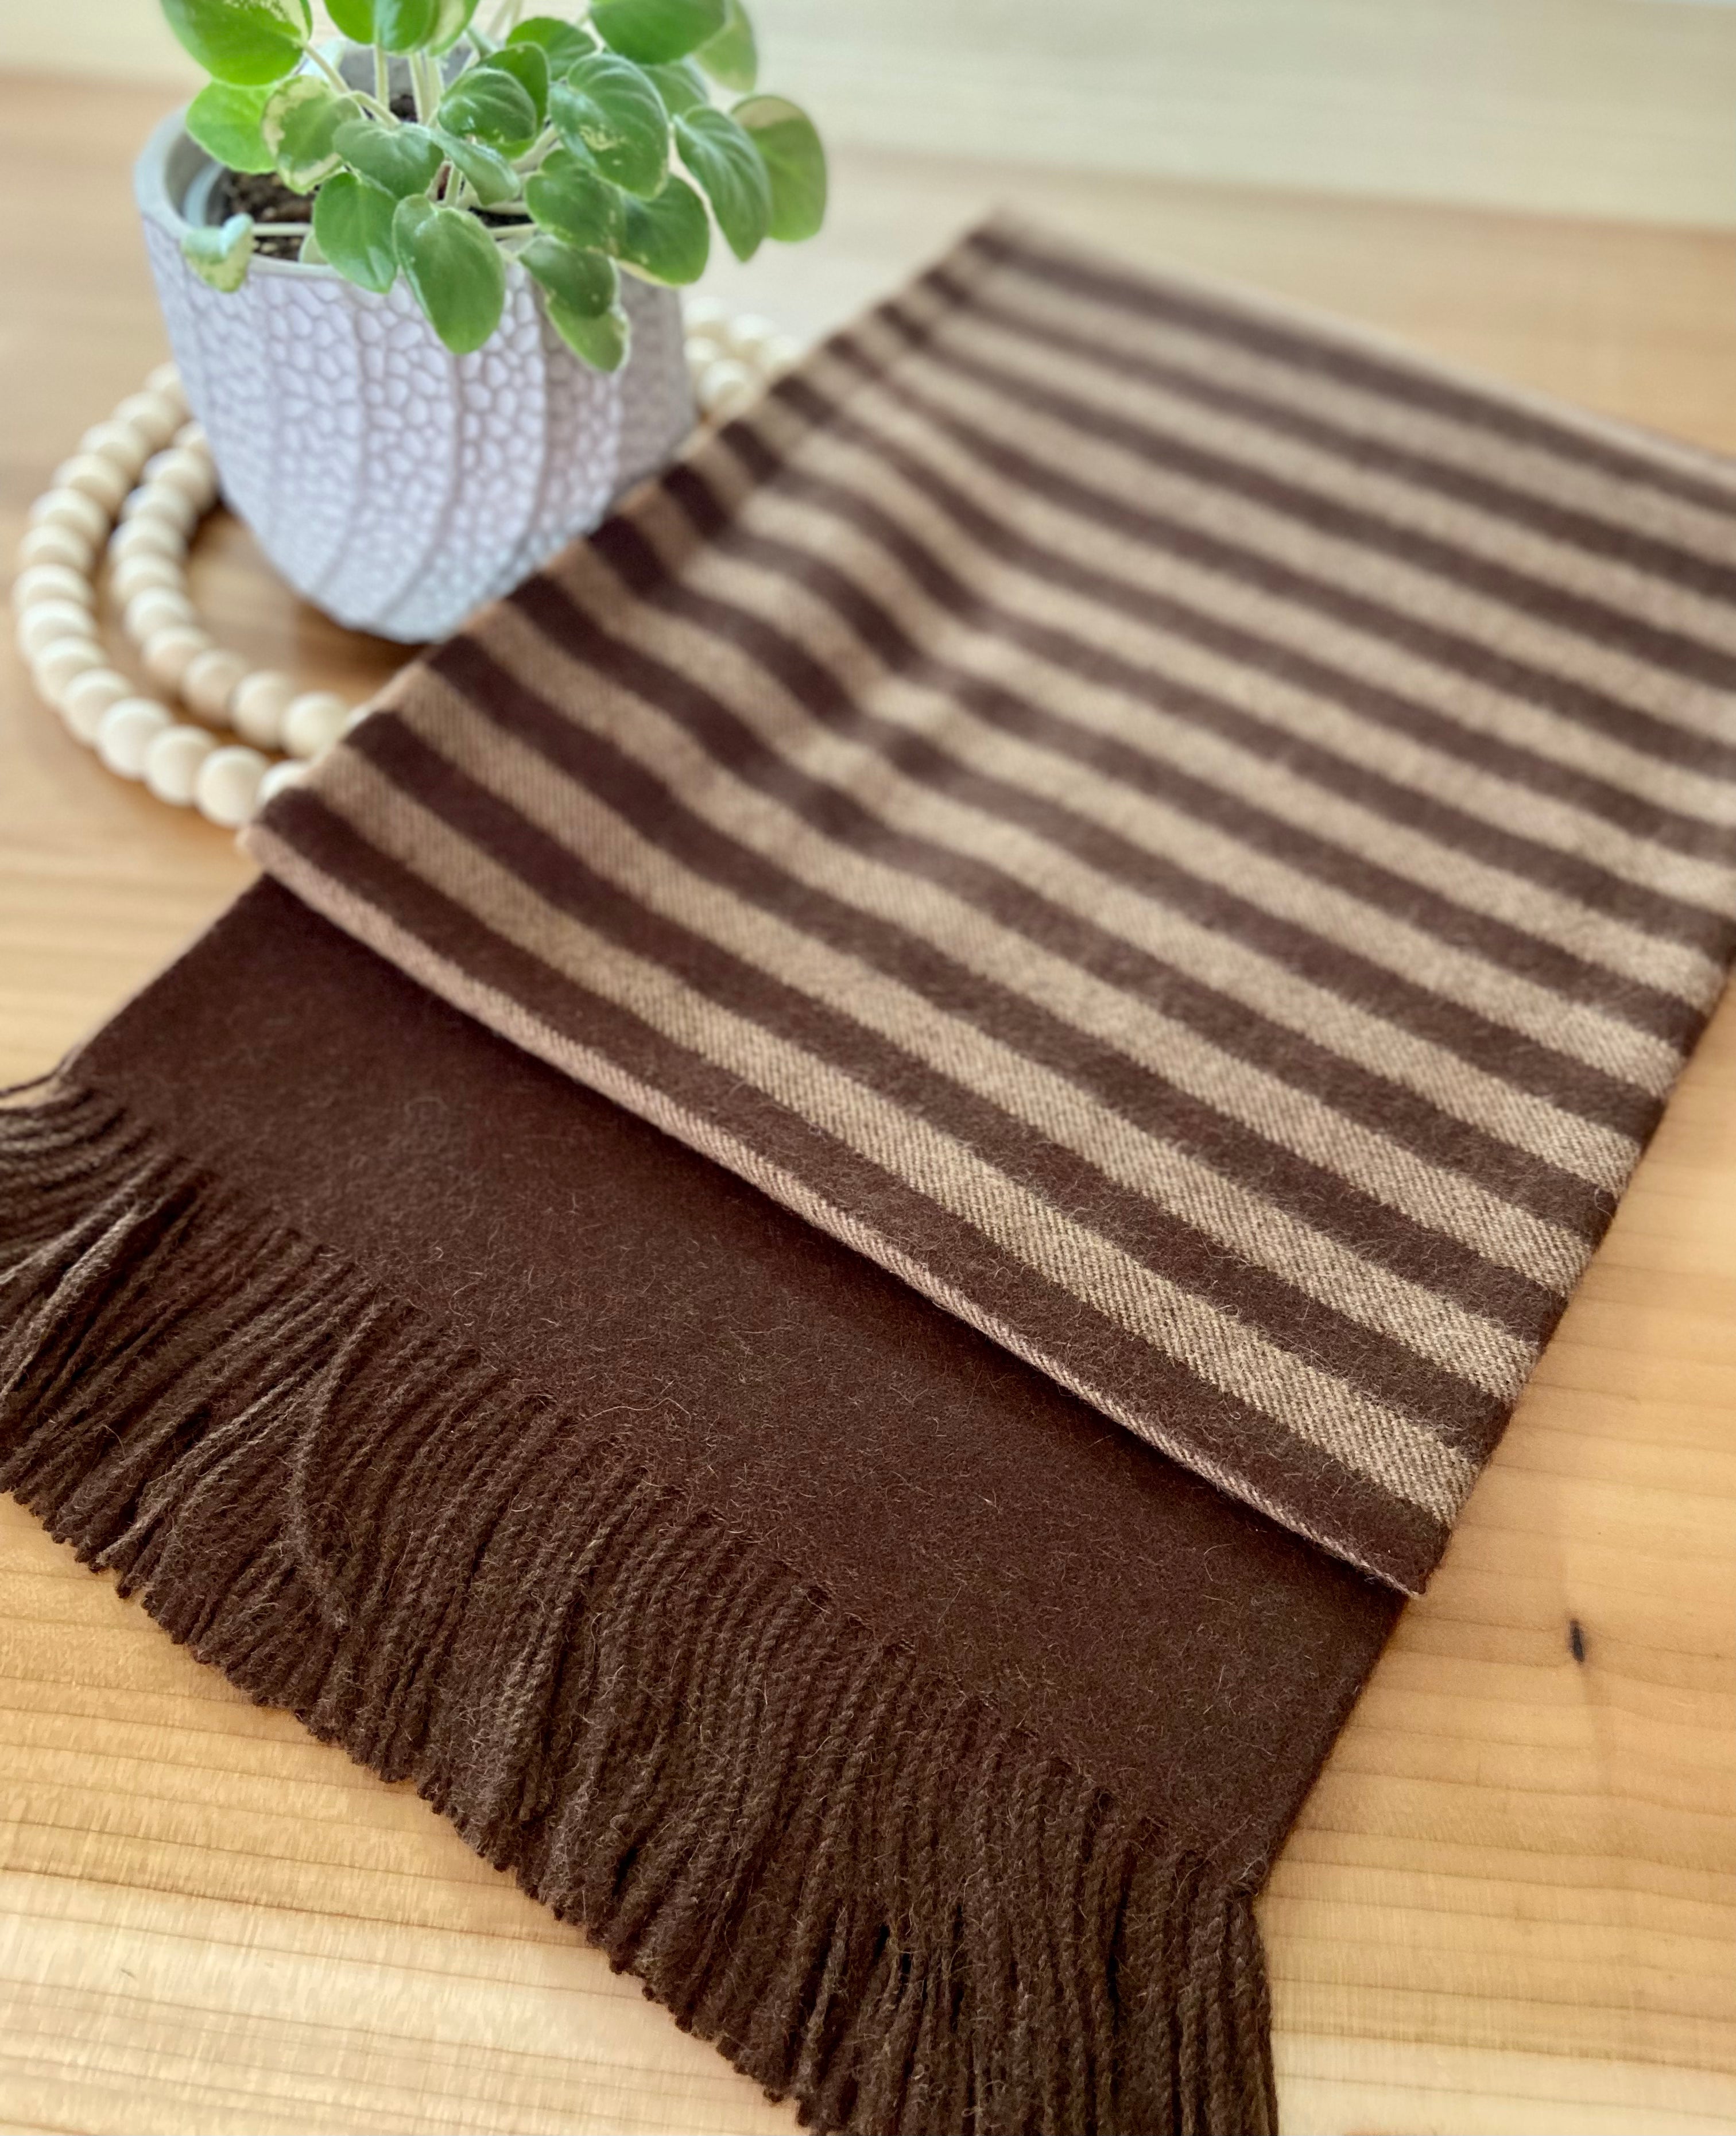 Fawn and Dark Brown Striped Throw- 100% Baby Alpaca